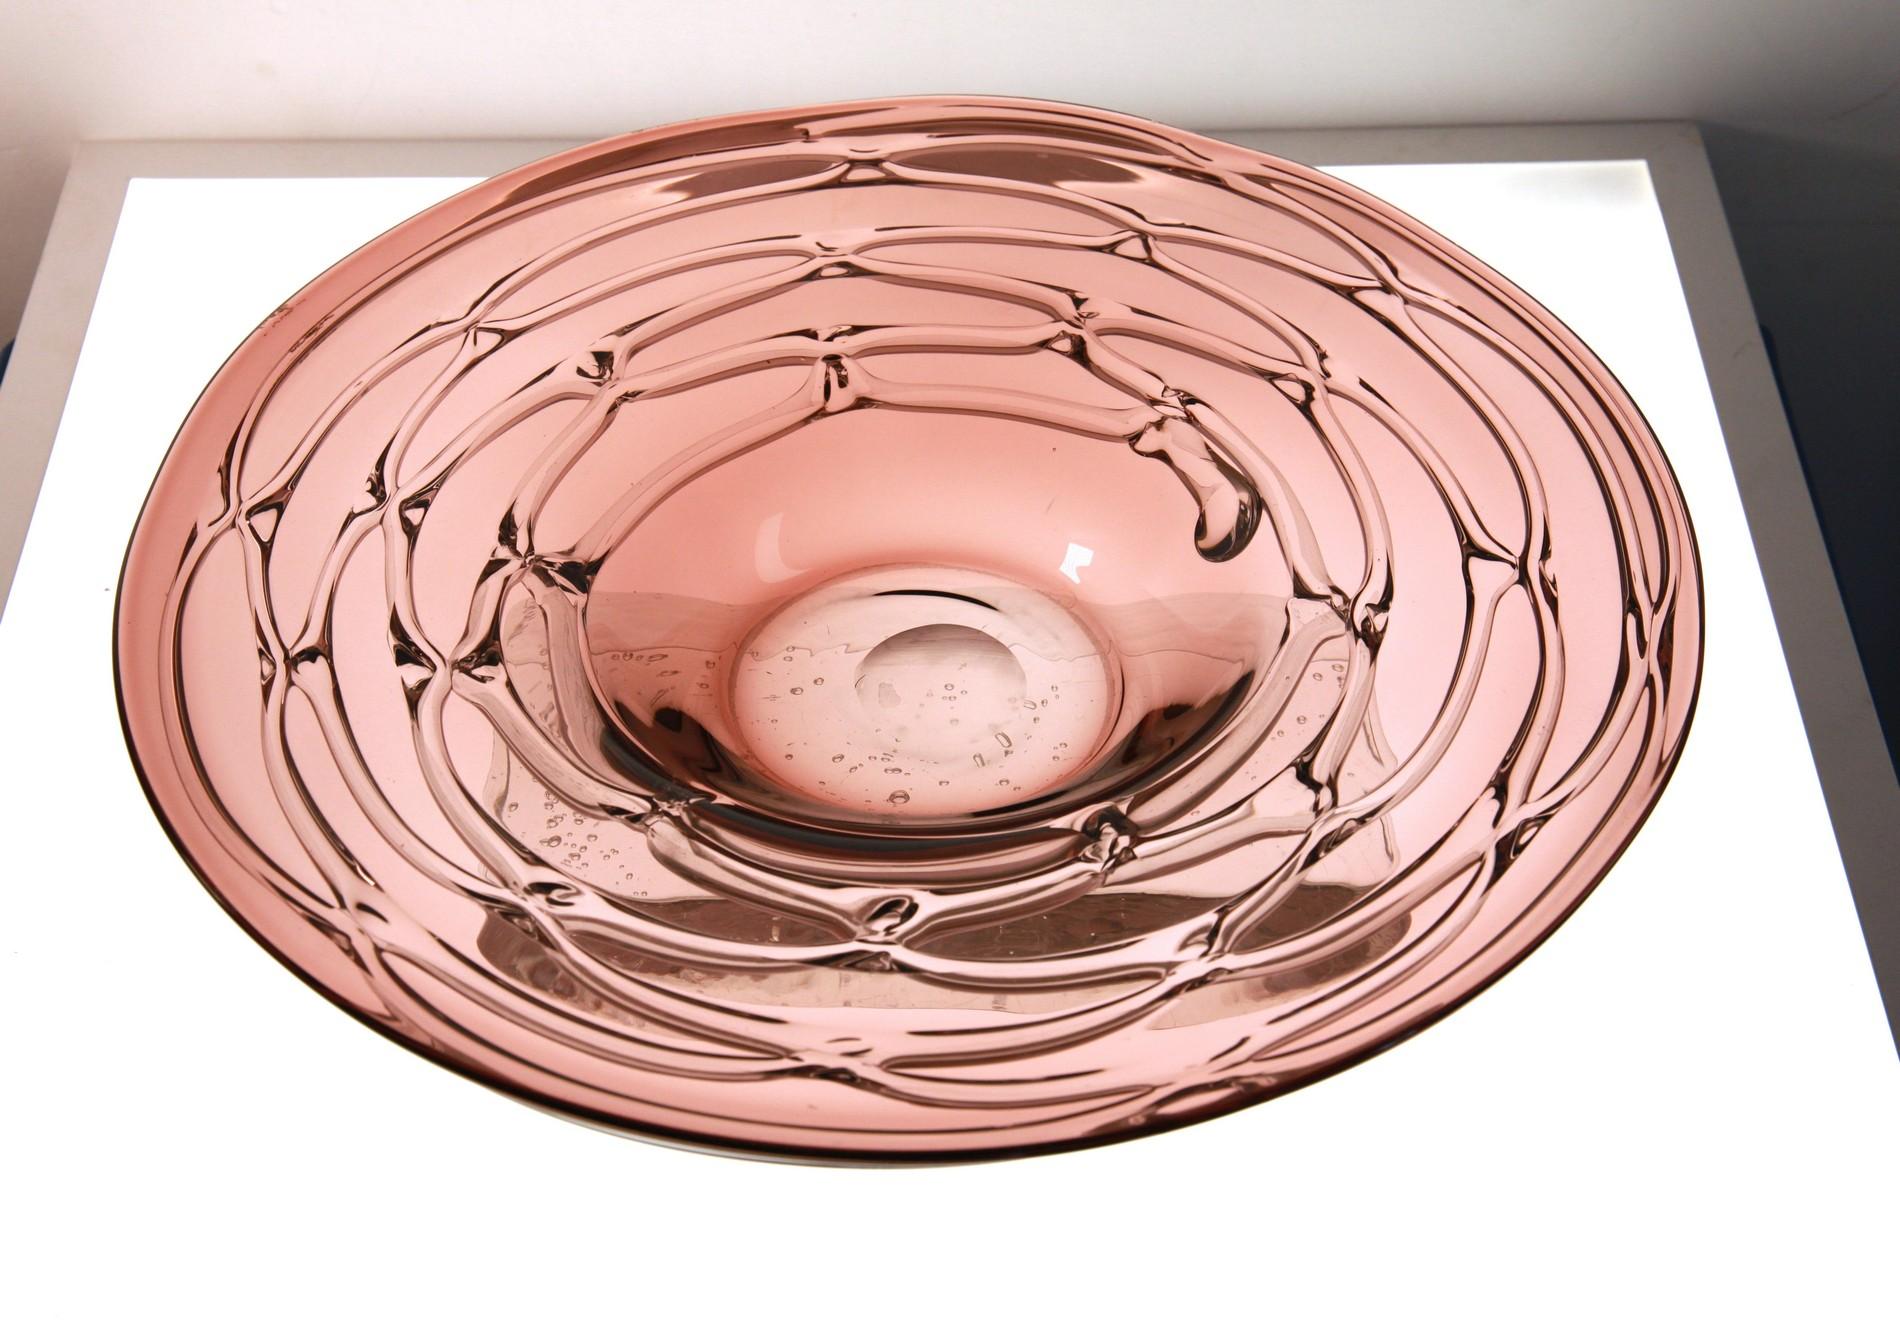 Interesting plate made in Ciclamino, a rose amethyst color that was used in the 1930s-1940s and after WW2 replaced by purple Amethyst. The color was used often by Zecchin and Salviati. Also Pauly.

The decoration is on the back of the plate